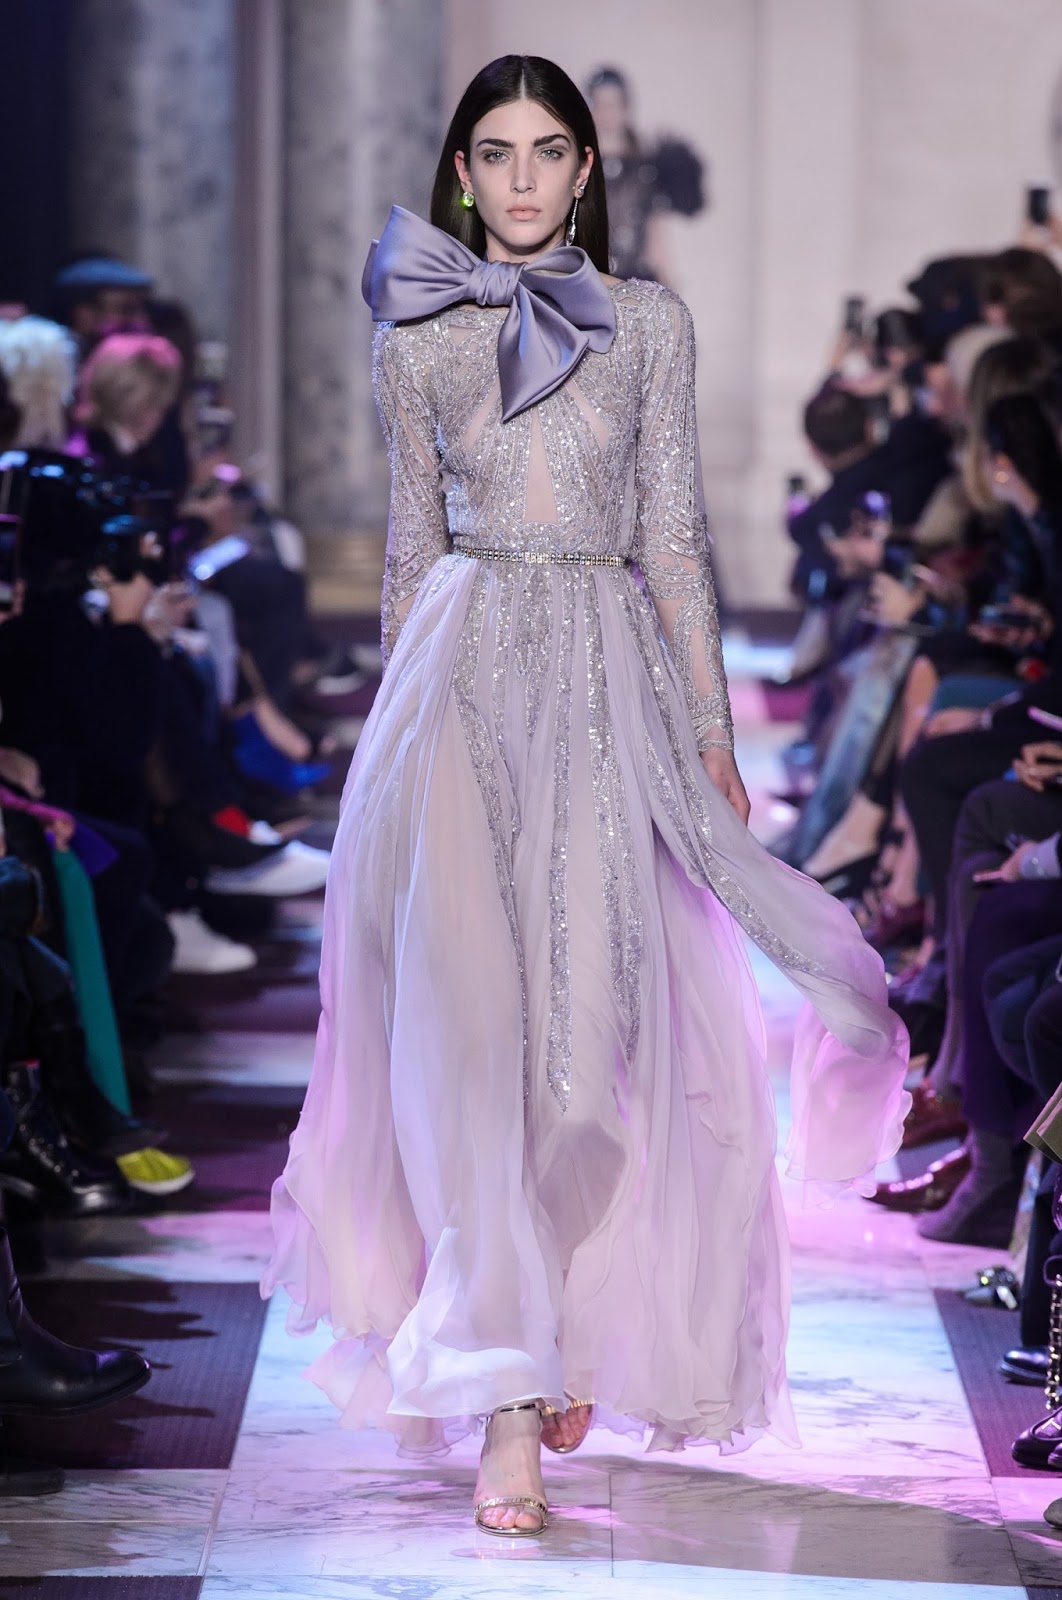 Gorgeous Couture Gowns: Elie Saab